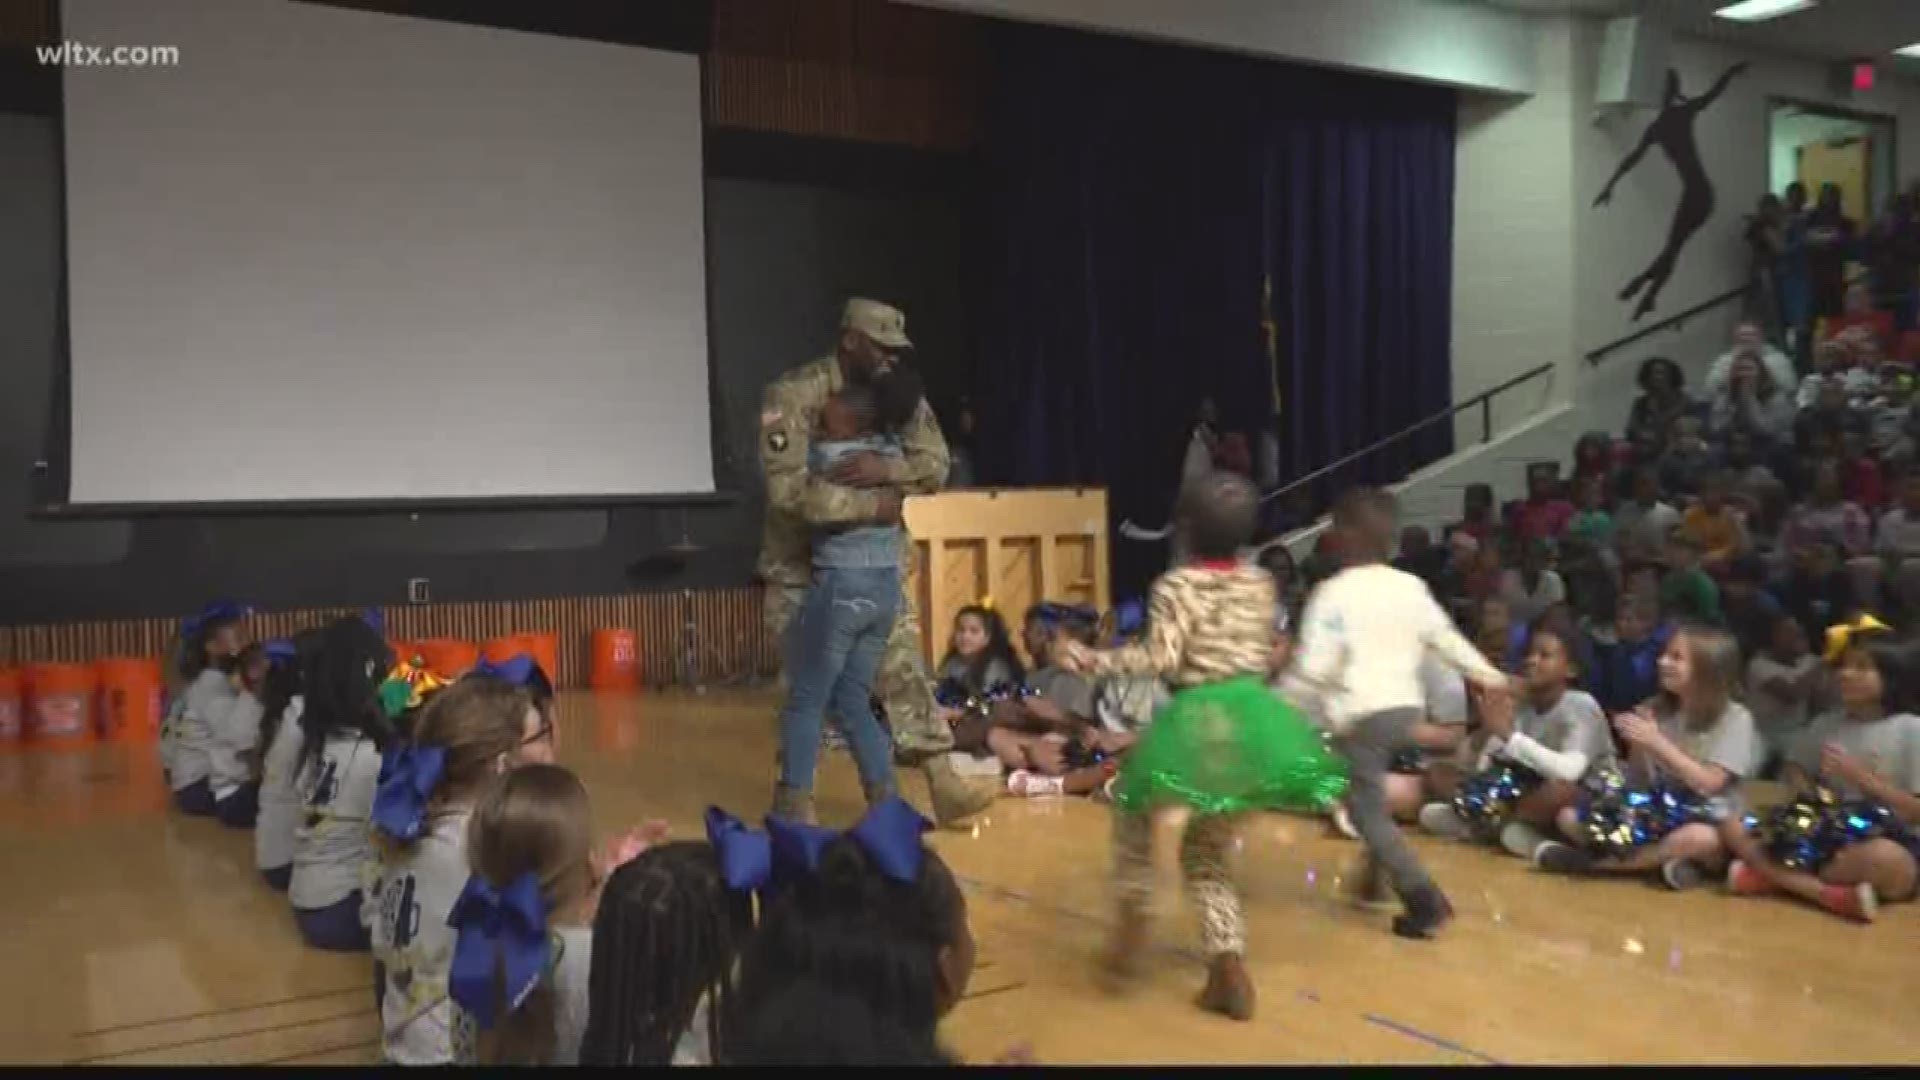 Three Harbison West Elementary kids got a big surprise when their dad came out during their Christmas program.